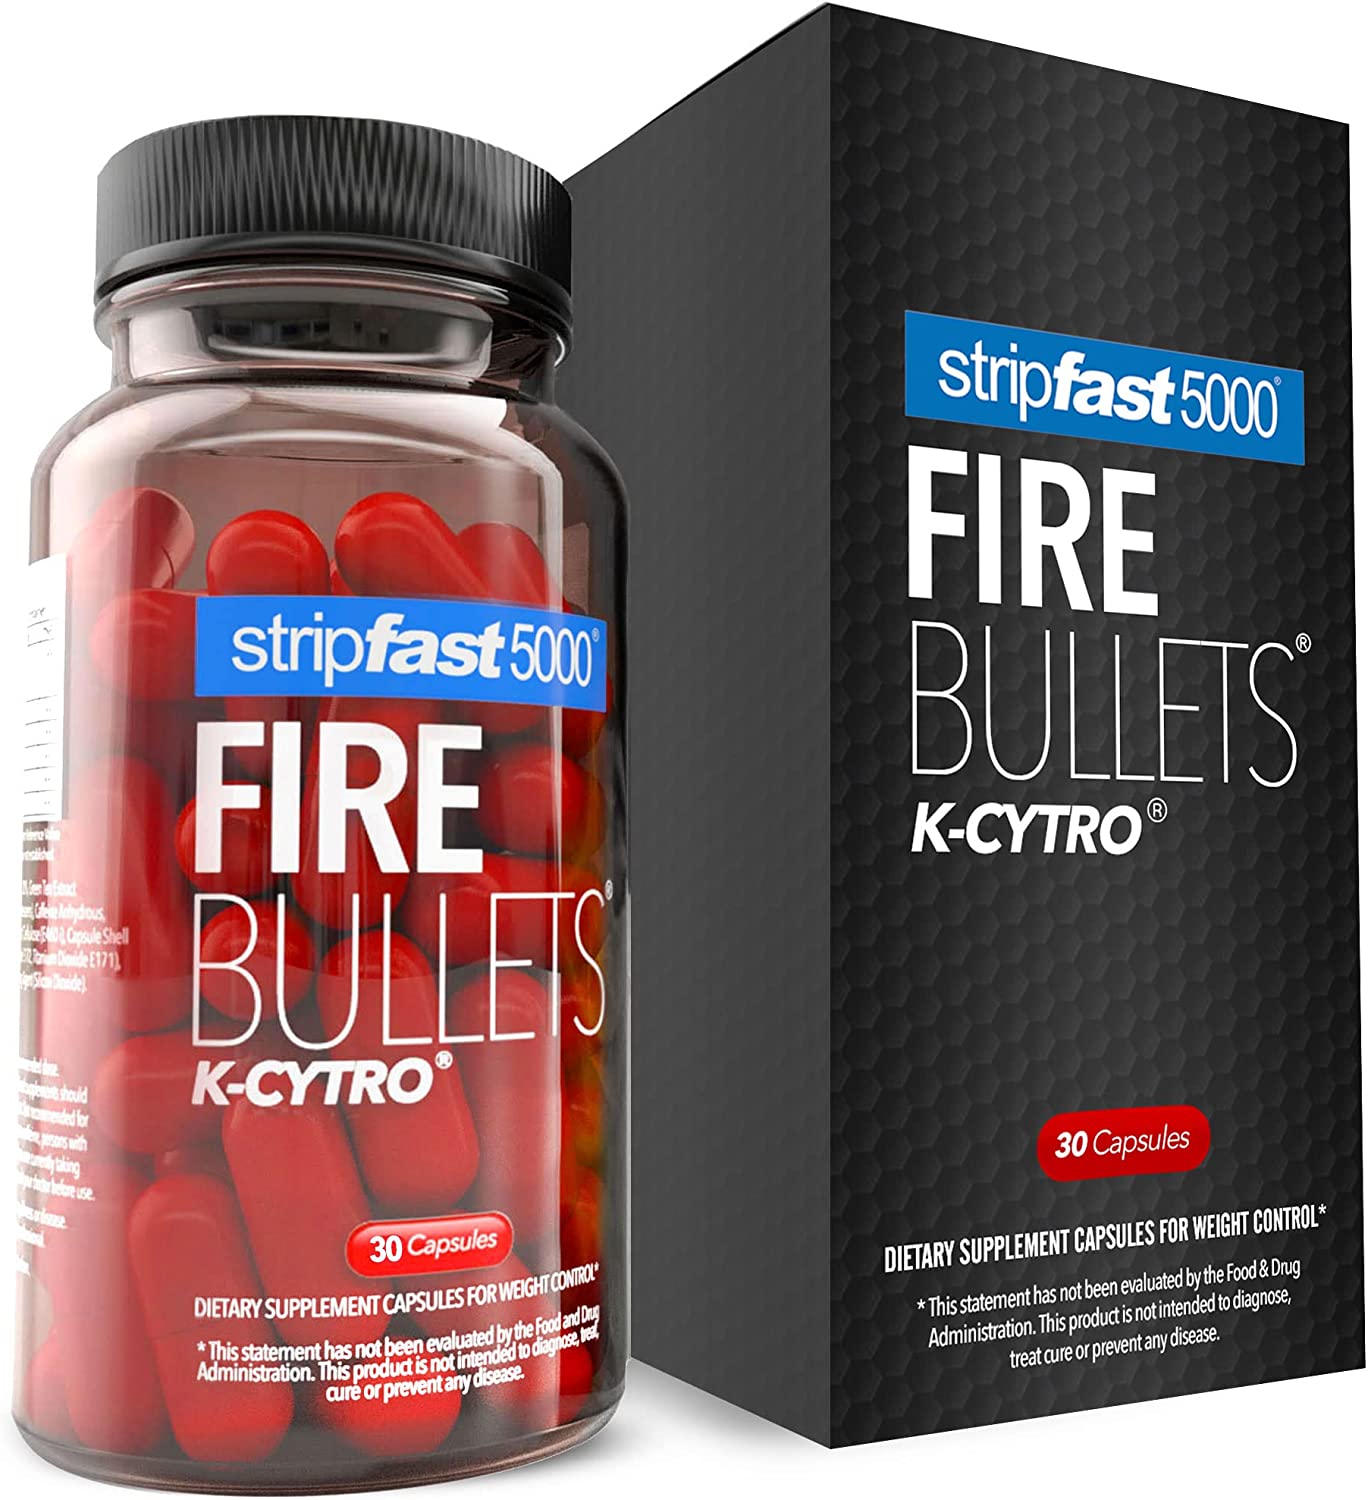 New Fire Bullets with K-CYTRO for Women & Men - 30 Capsules